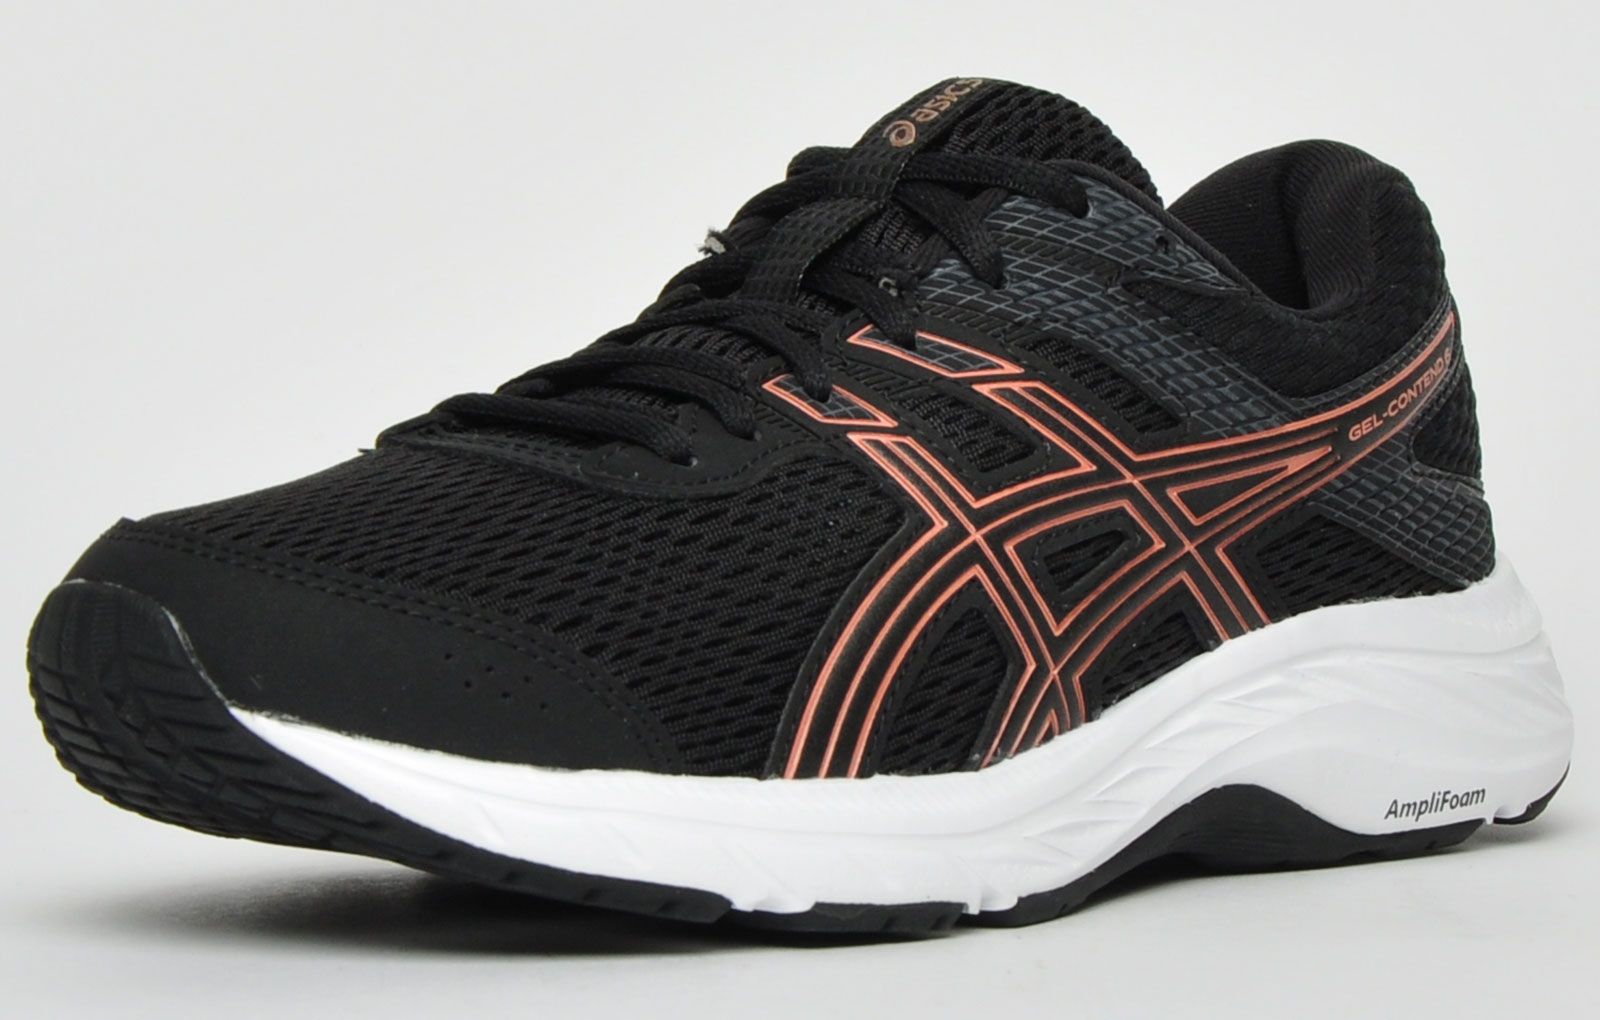 The Asics Gel Contend 6 is a running shoe that is packed with features designed to bring out your optimum level of performance. <p class=